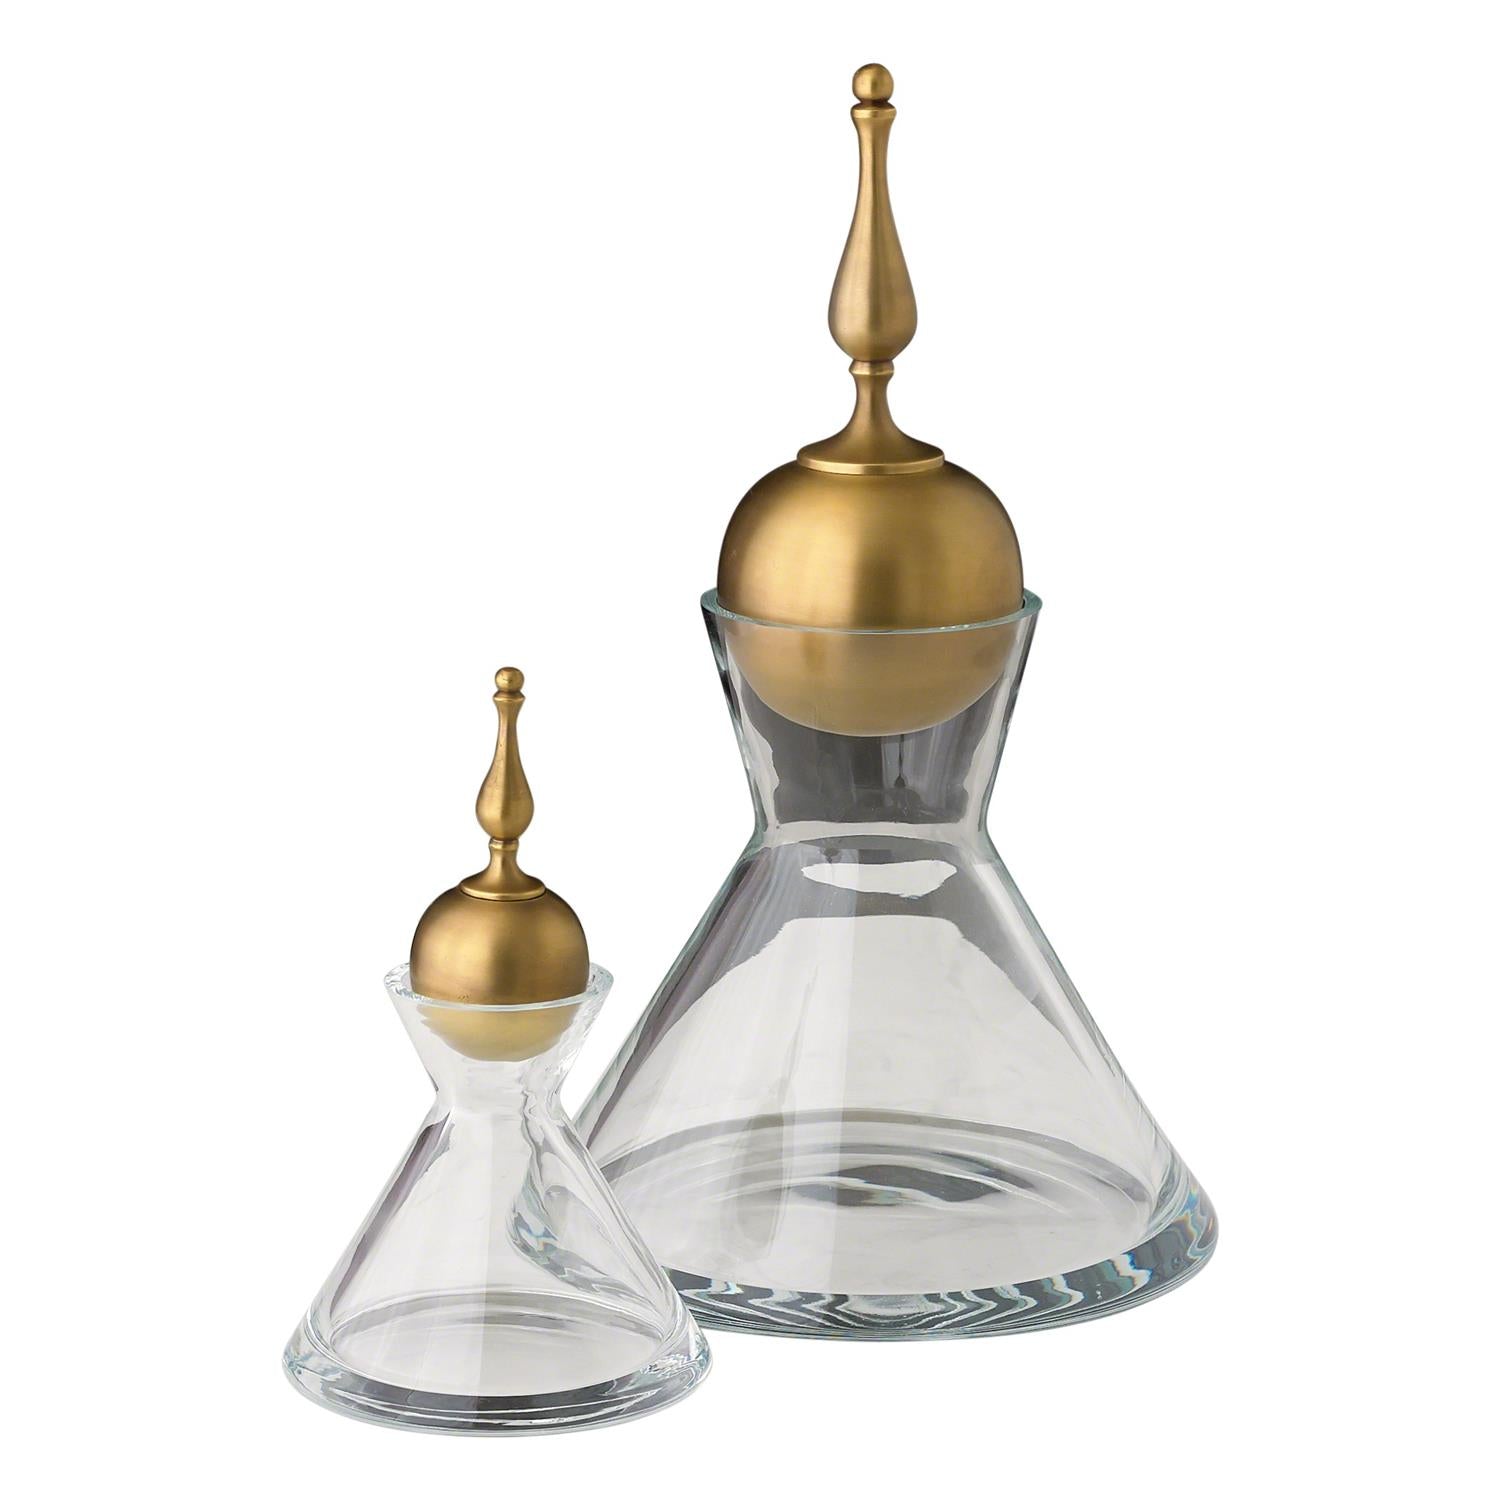 Finial Decanter Small-Global Views-Sculptures & Objects-Artistic Elements